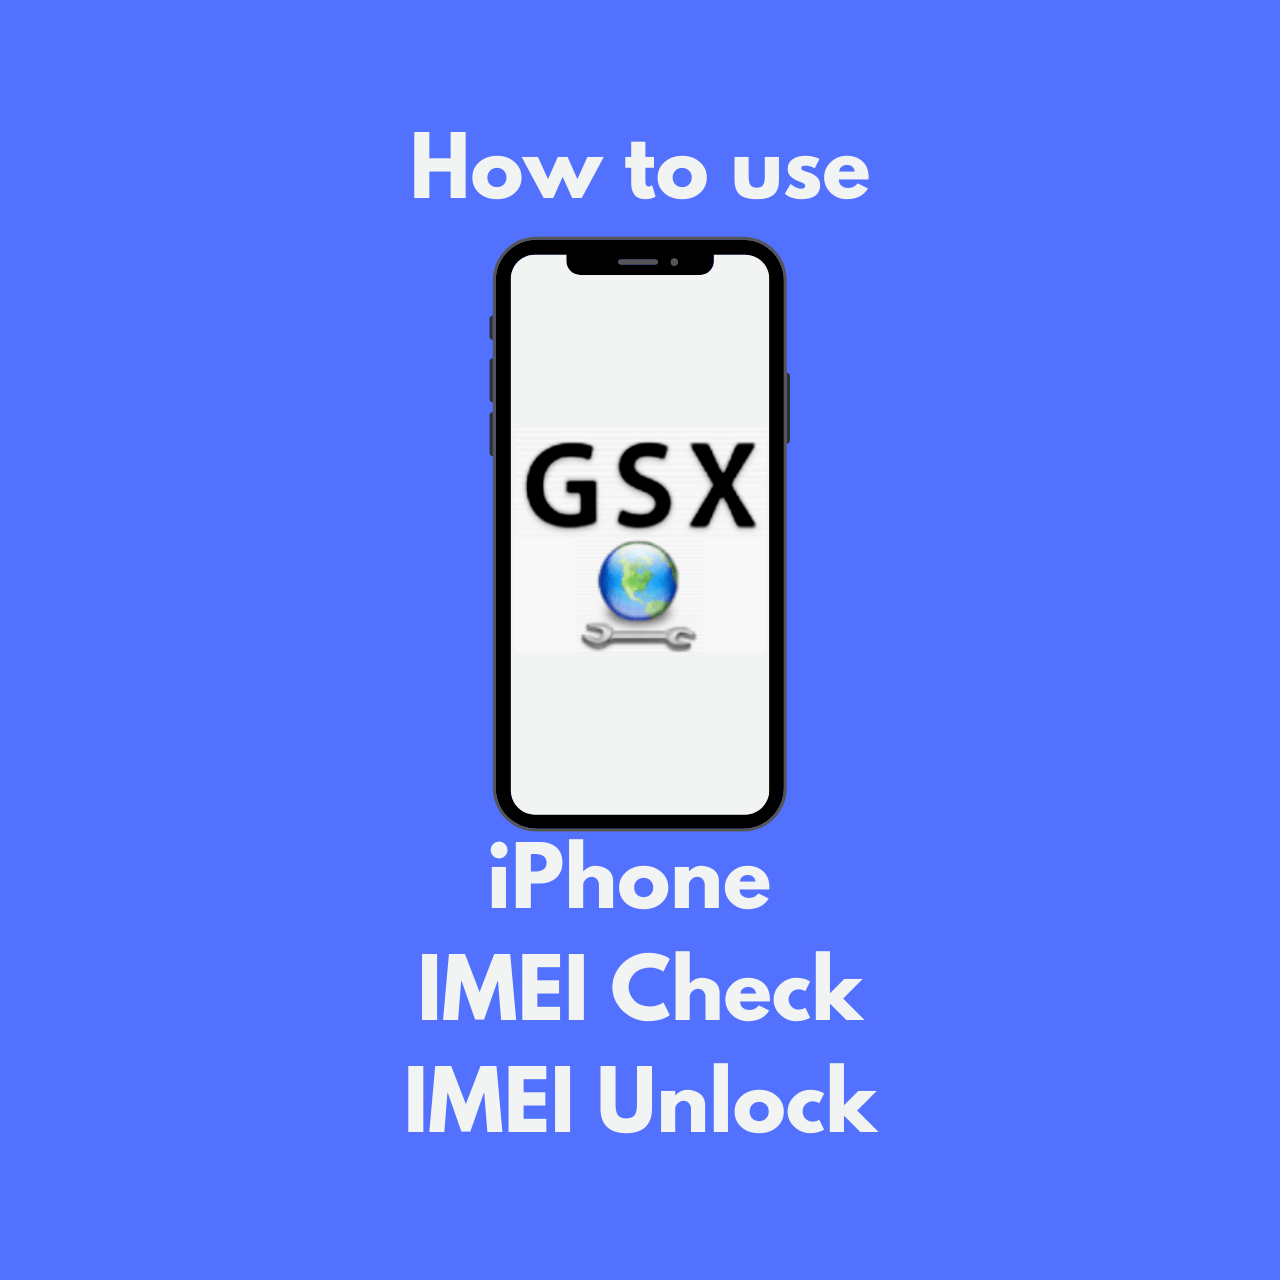 How To Use Apple Gsx Service For Iphone Imei Check And Unlock